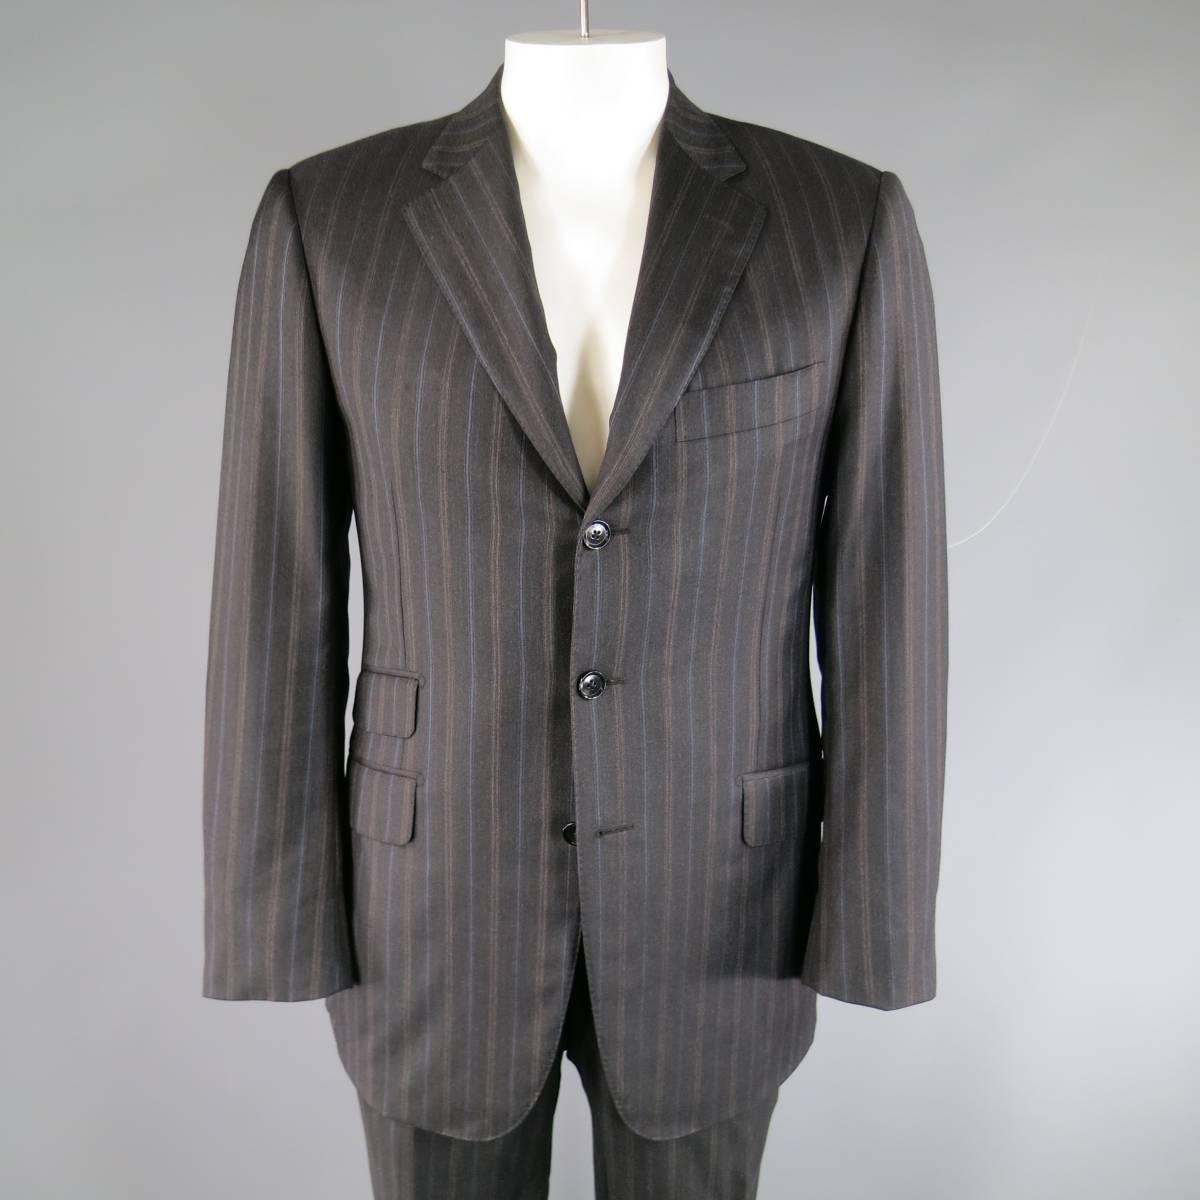 Classic PAL ZILERI suit in charcoal wool with light blue, gray, and orange pinstriped pattern throughout includes a three button, notch lapel sport coat with functional button cuff sleeves, double vented back & top stitching and matching tailored